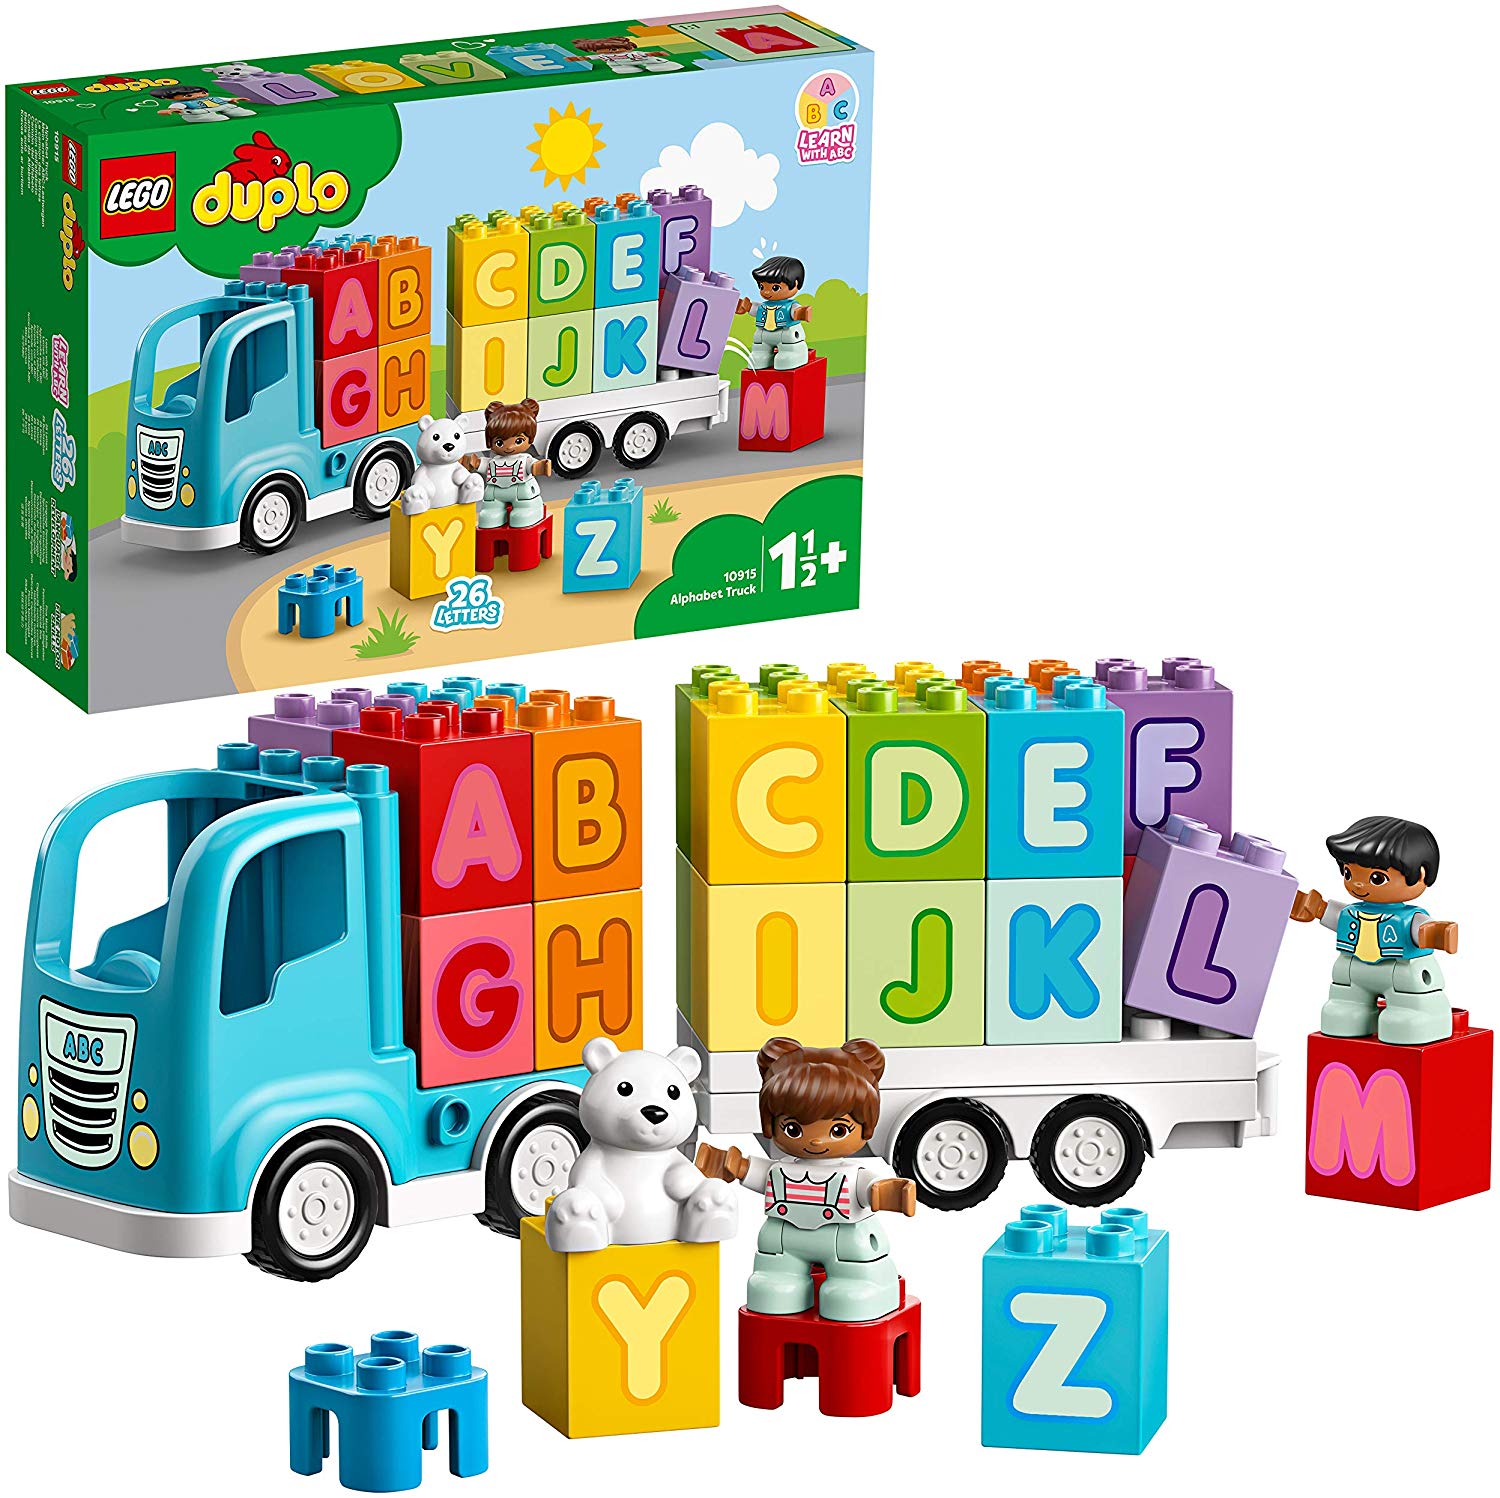 Lego 10915 Duplo My First Abc Truck Set For Toddlers 1.5 Years Old With Let